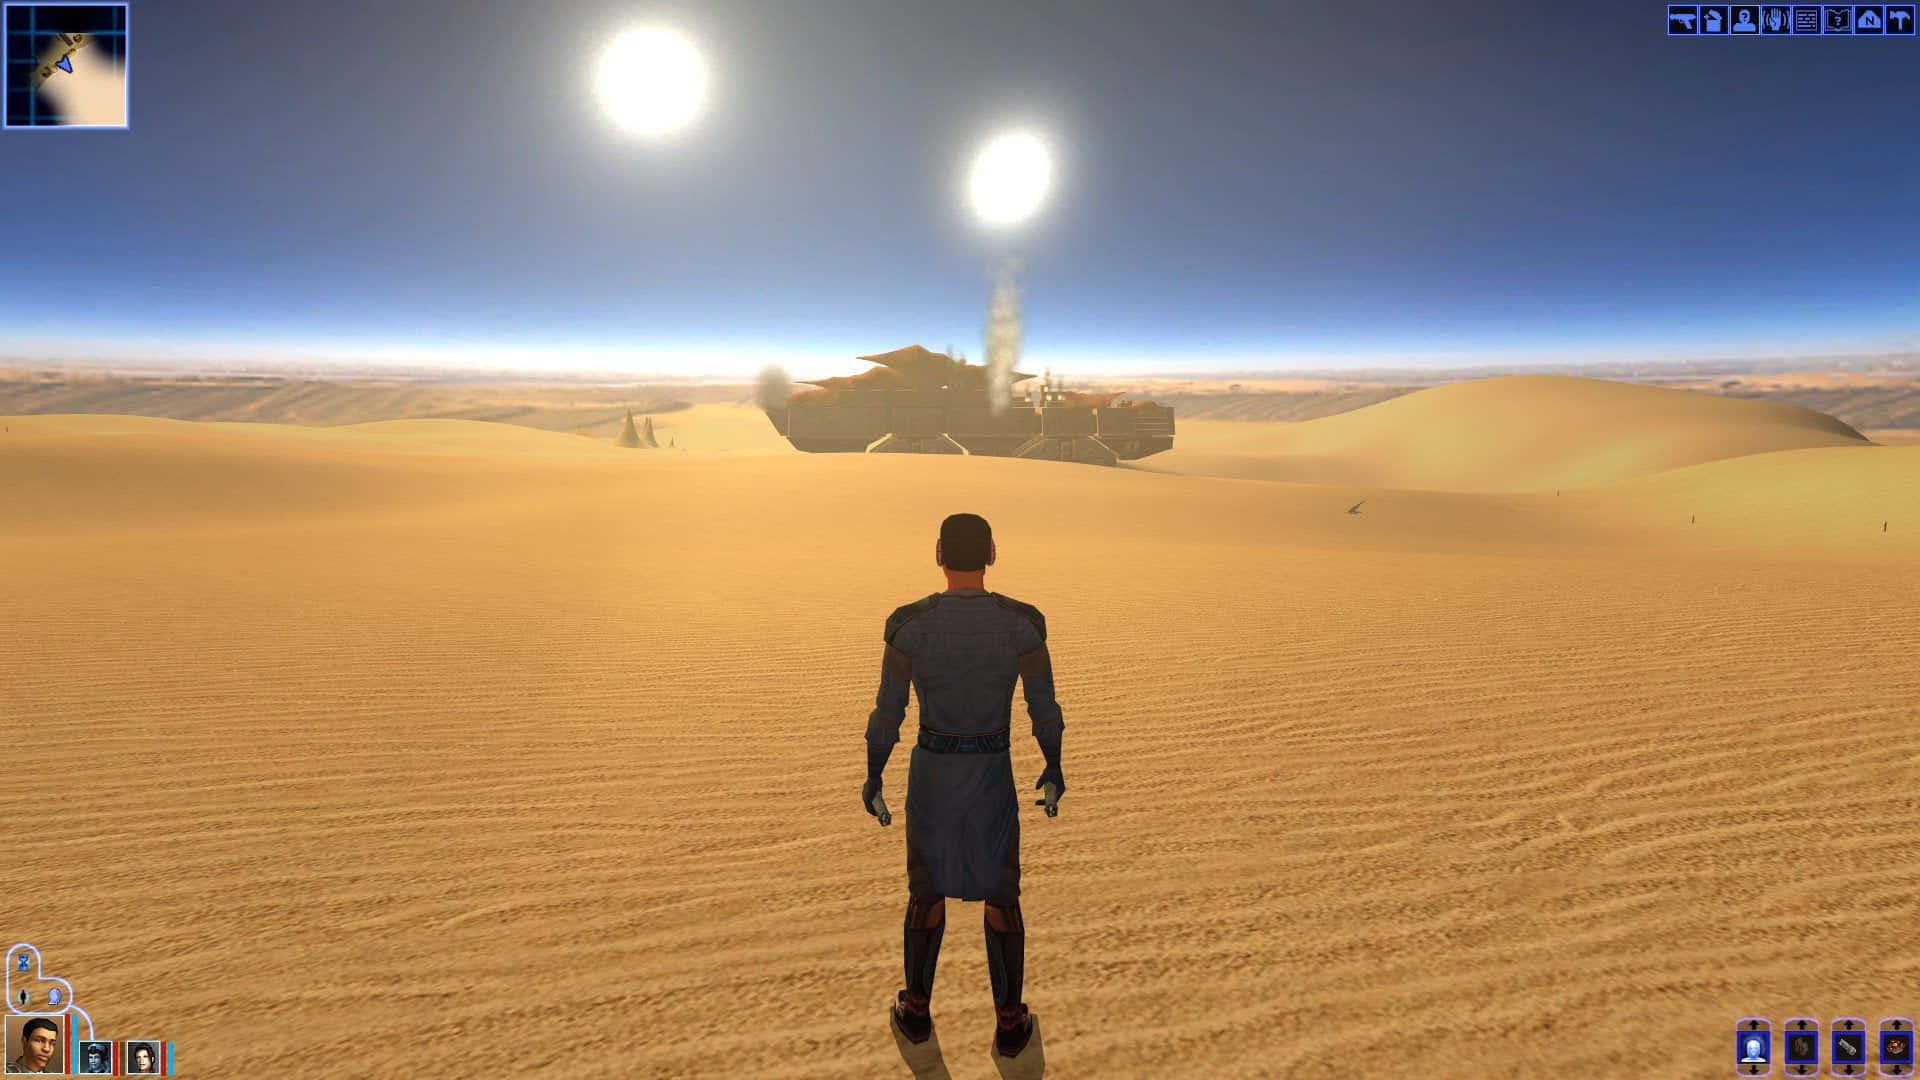 Welcome to Tatooine, That endlessly stretches across the twilight dunes Wallpaper